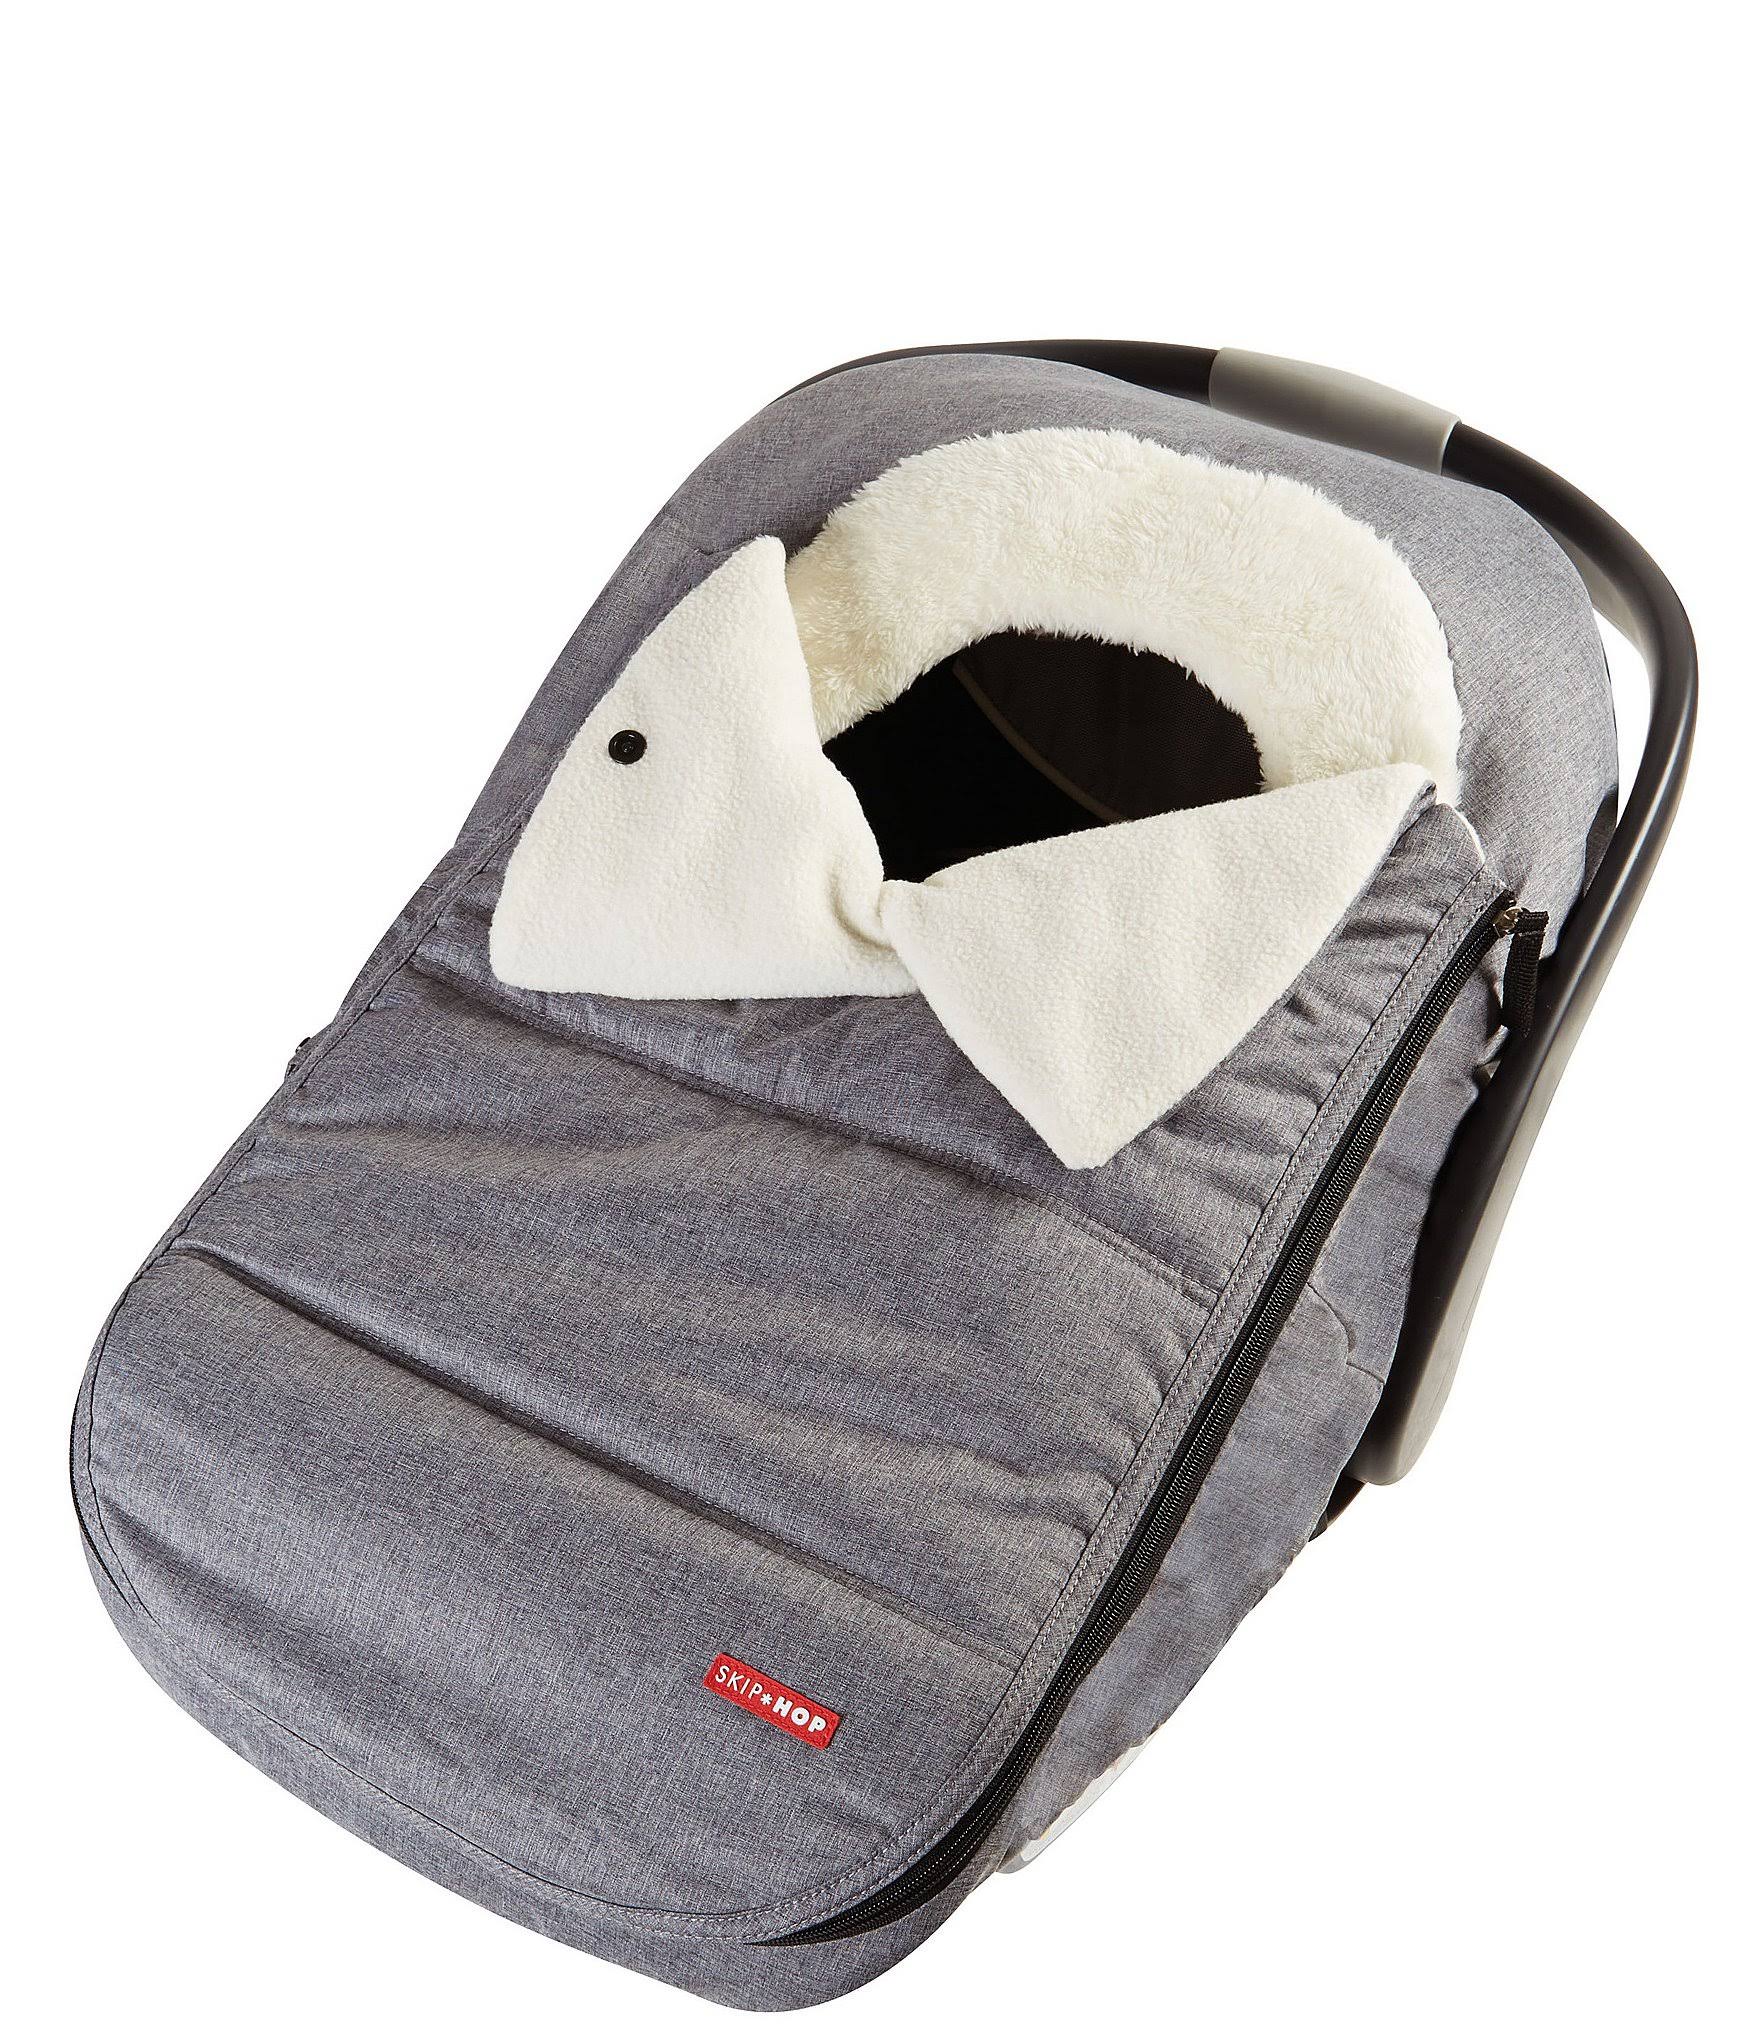 Skip Hop Stroll Go Infant and Toddler Automotive Car Seat Cover